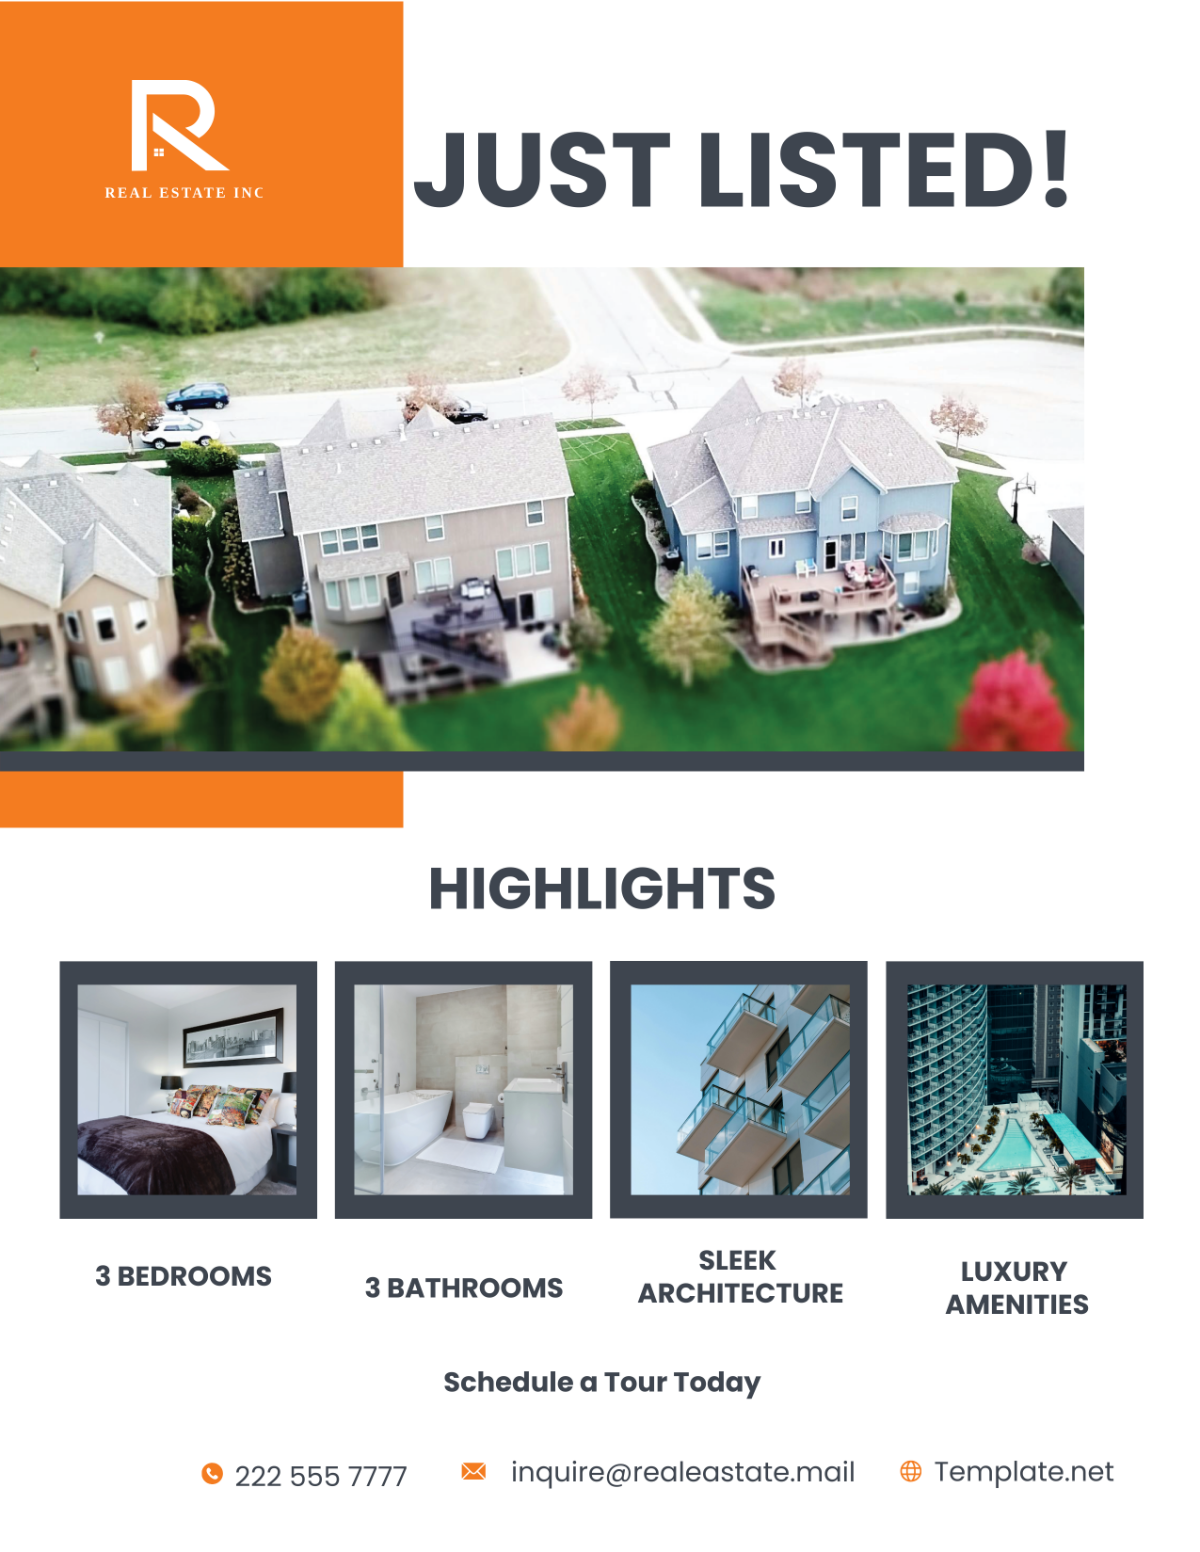 Just Listed Property Flyer Template